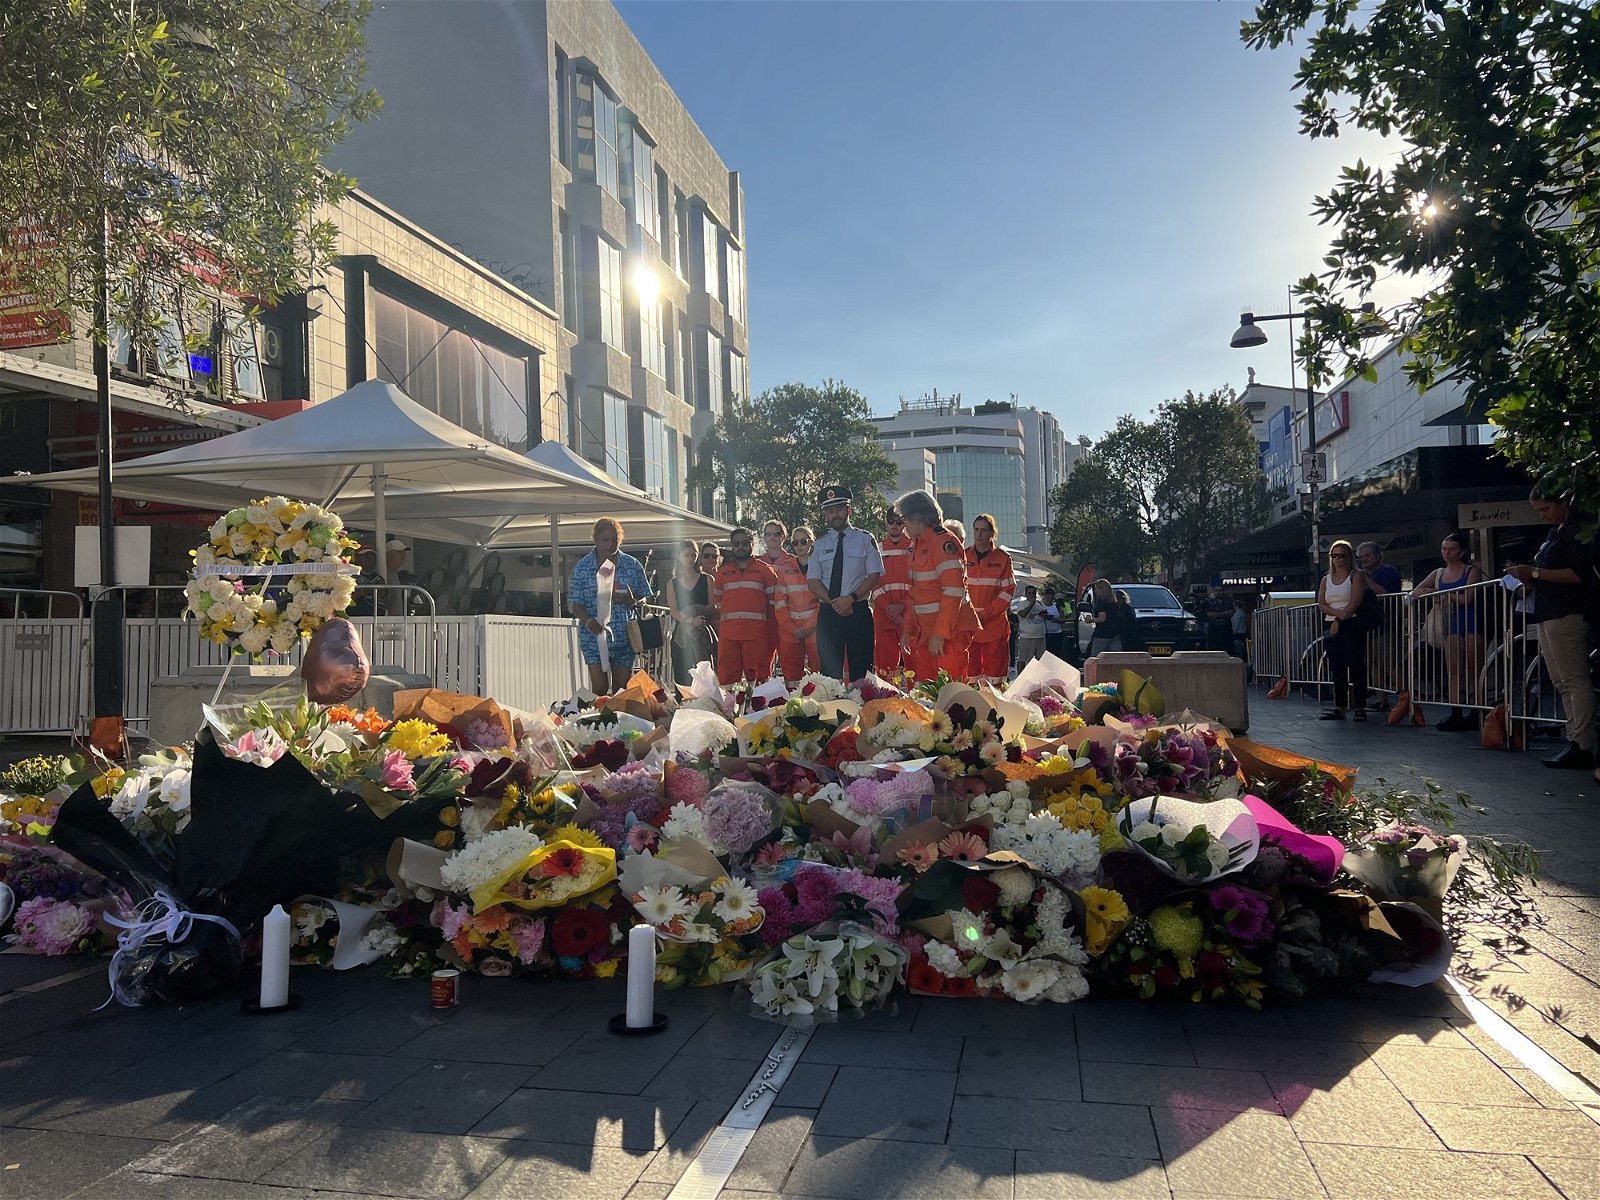 A group of people in fluro orange jumpsuits stand next to a bunch of flowers.